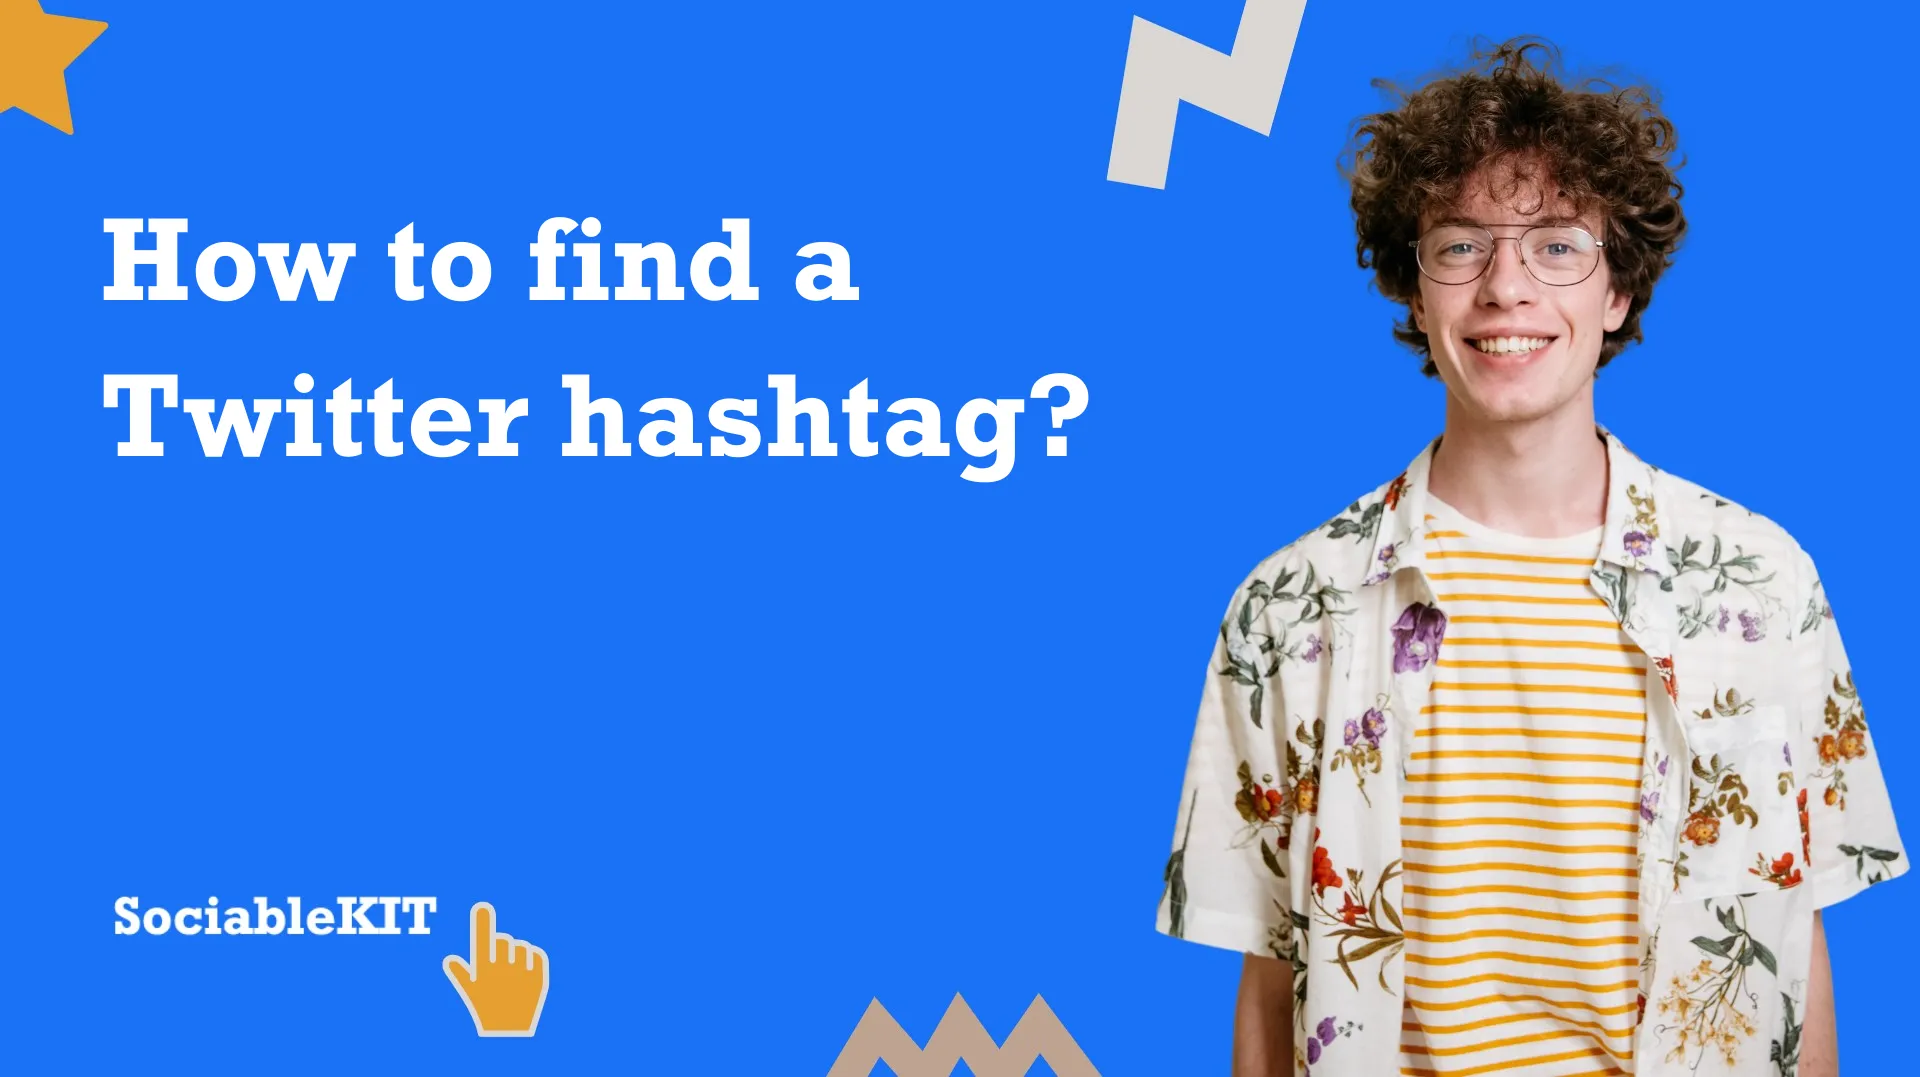 How to find a Twitter hashtag?